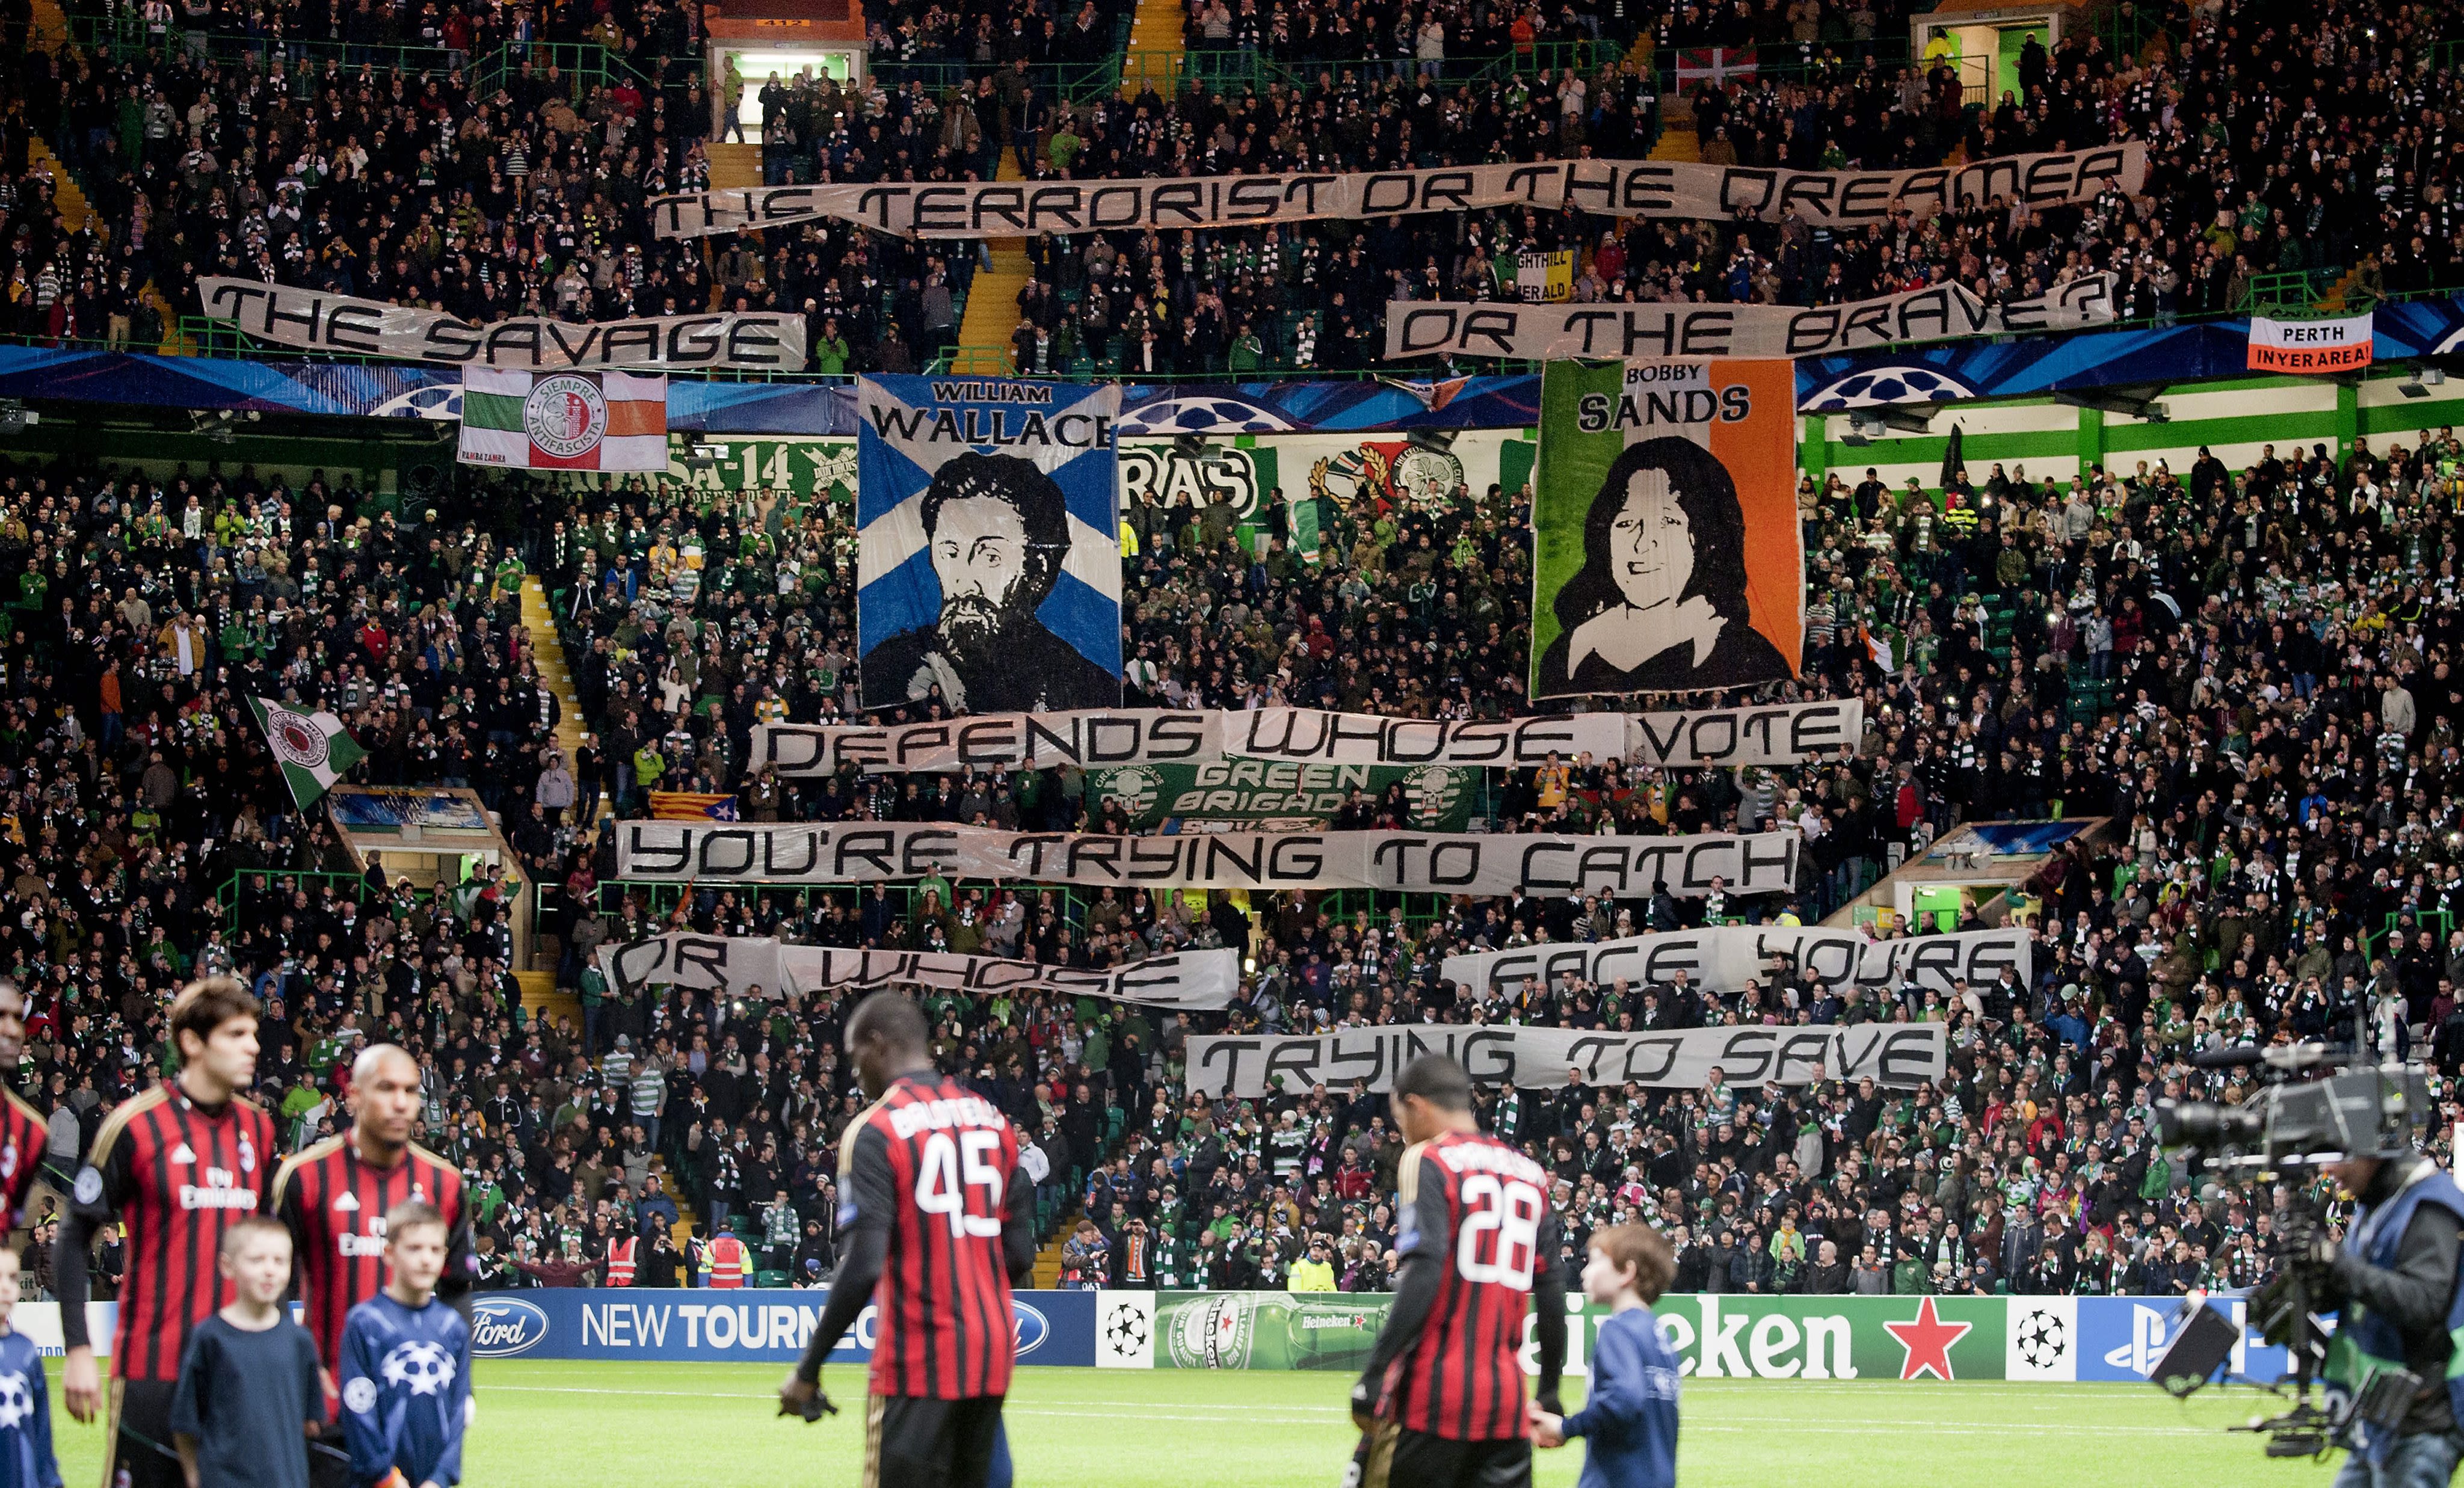 Supporters are furious that Celtic FC branding was put up at St